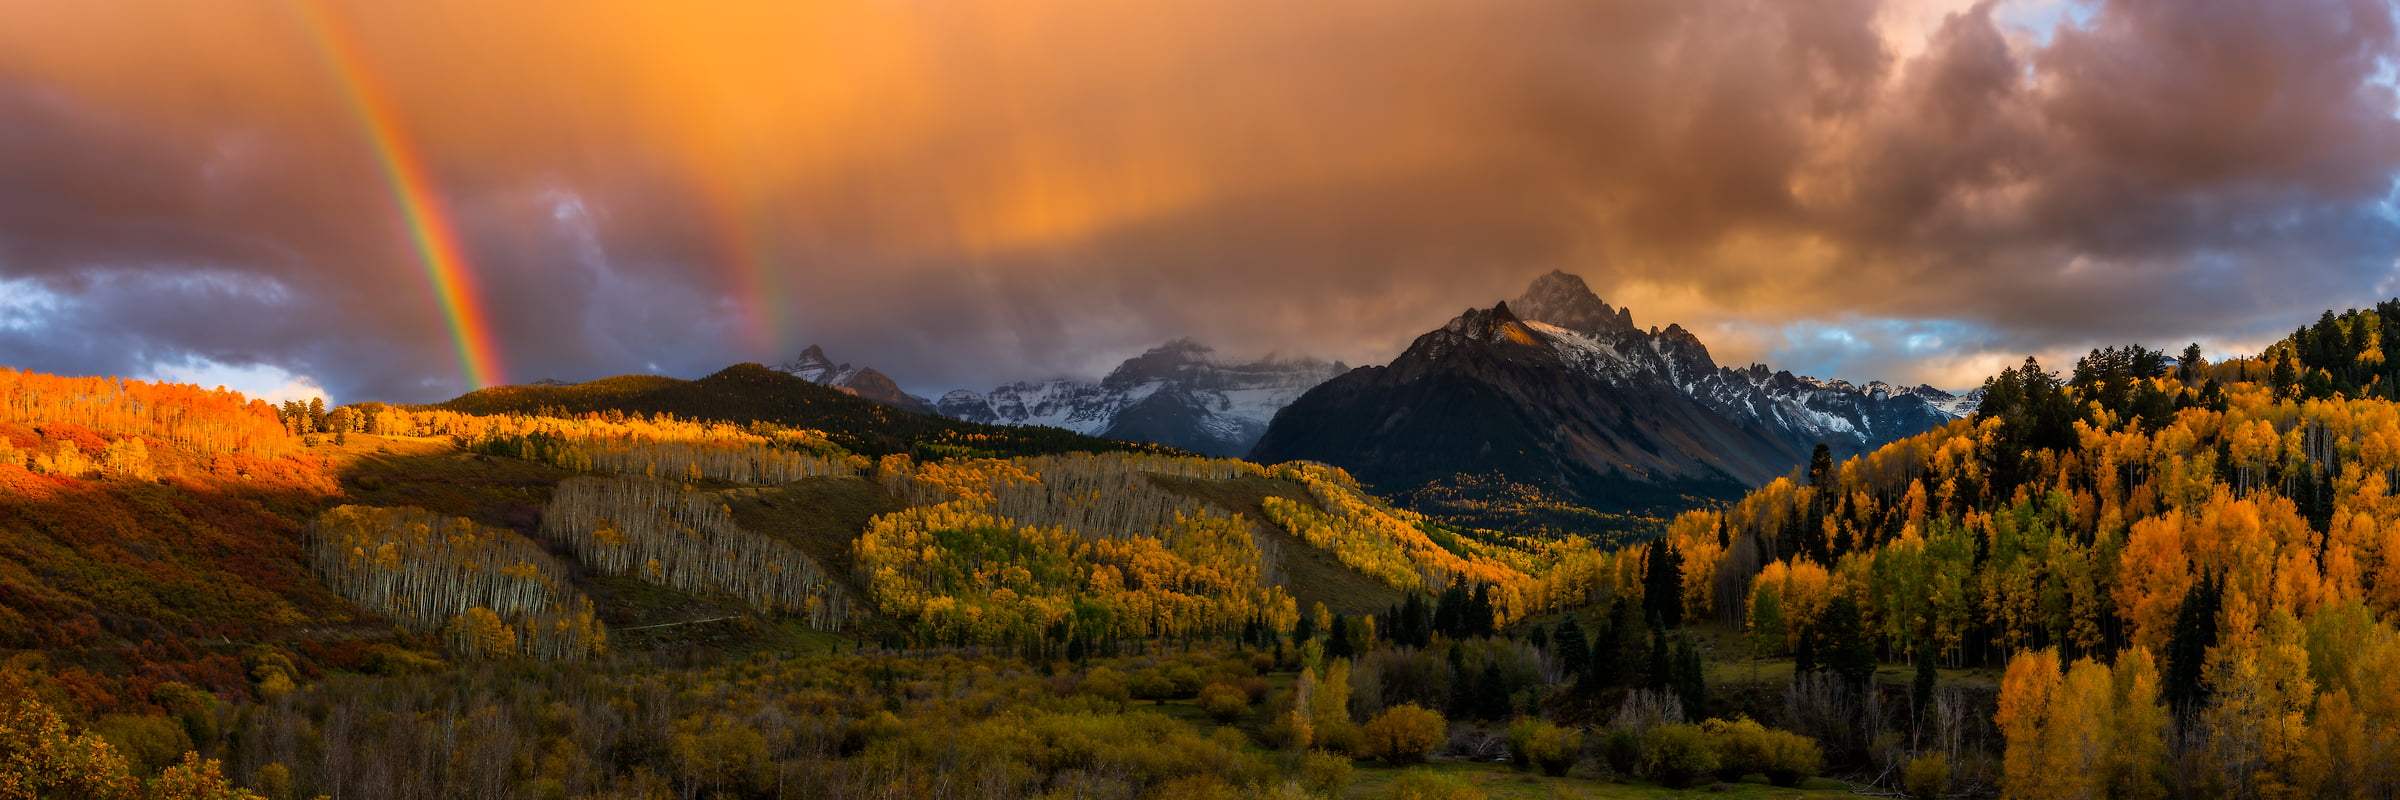 101 megapixels! A very high resolution, large-format VAST photo print of a mountain landscape with a rainbow; landscape photograph created by Phillip Noll in Ridgway, Colorado